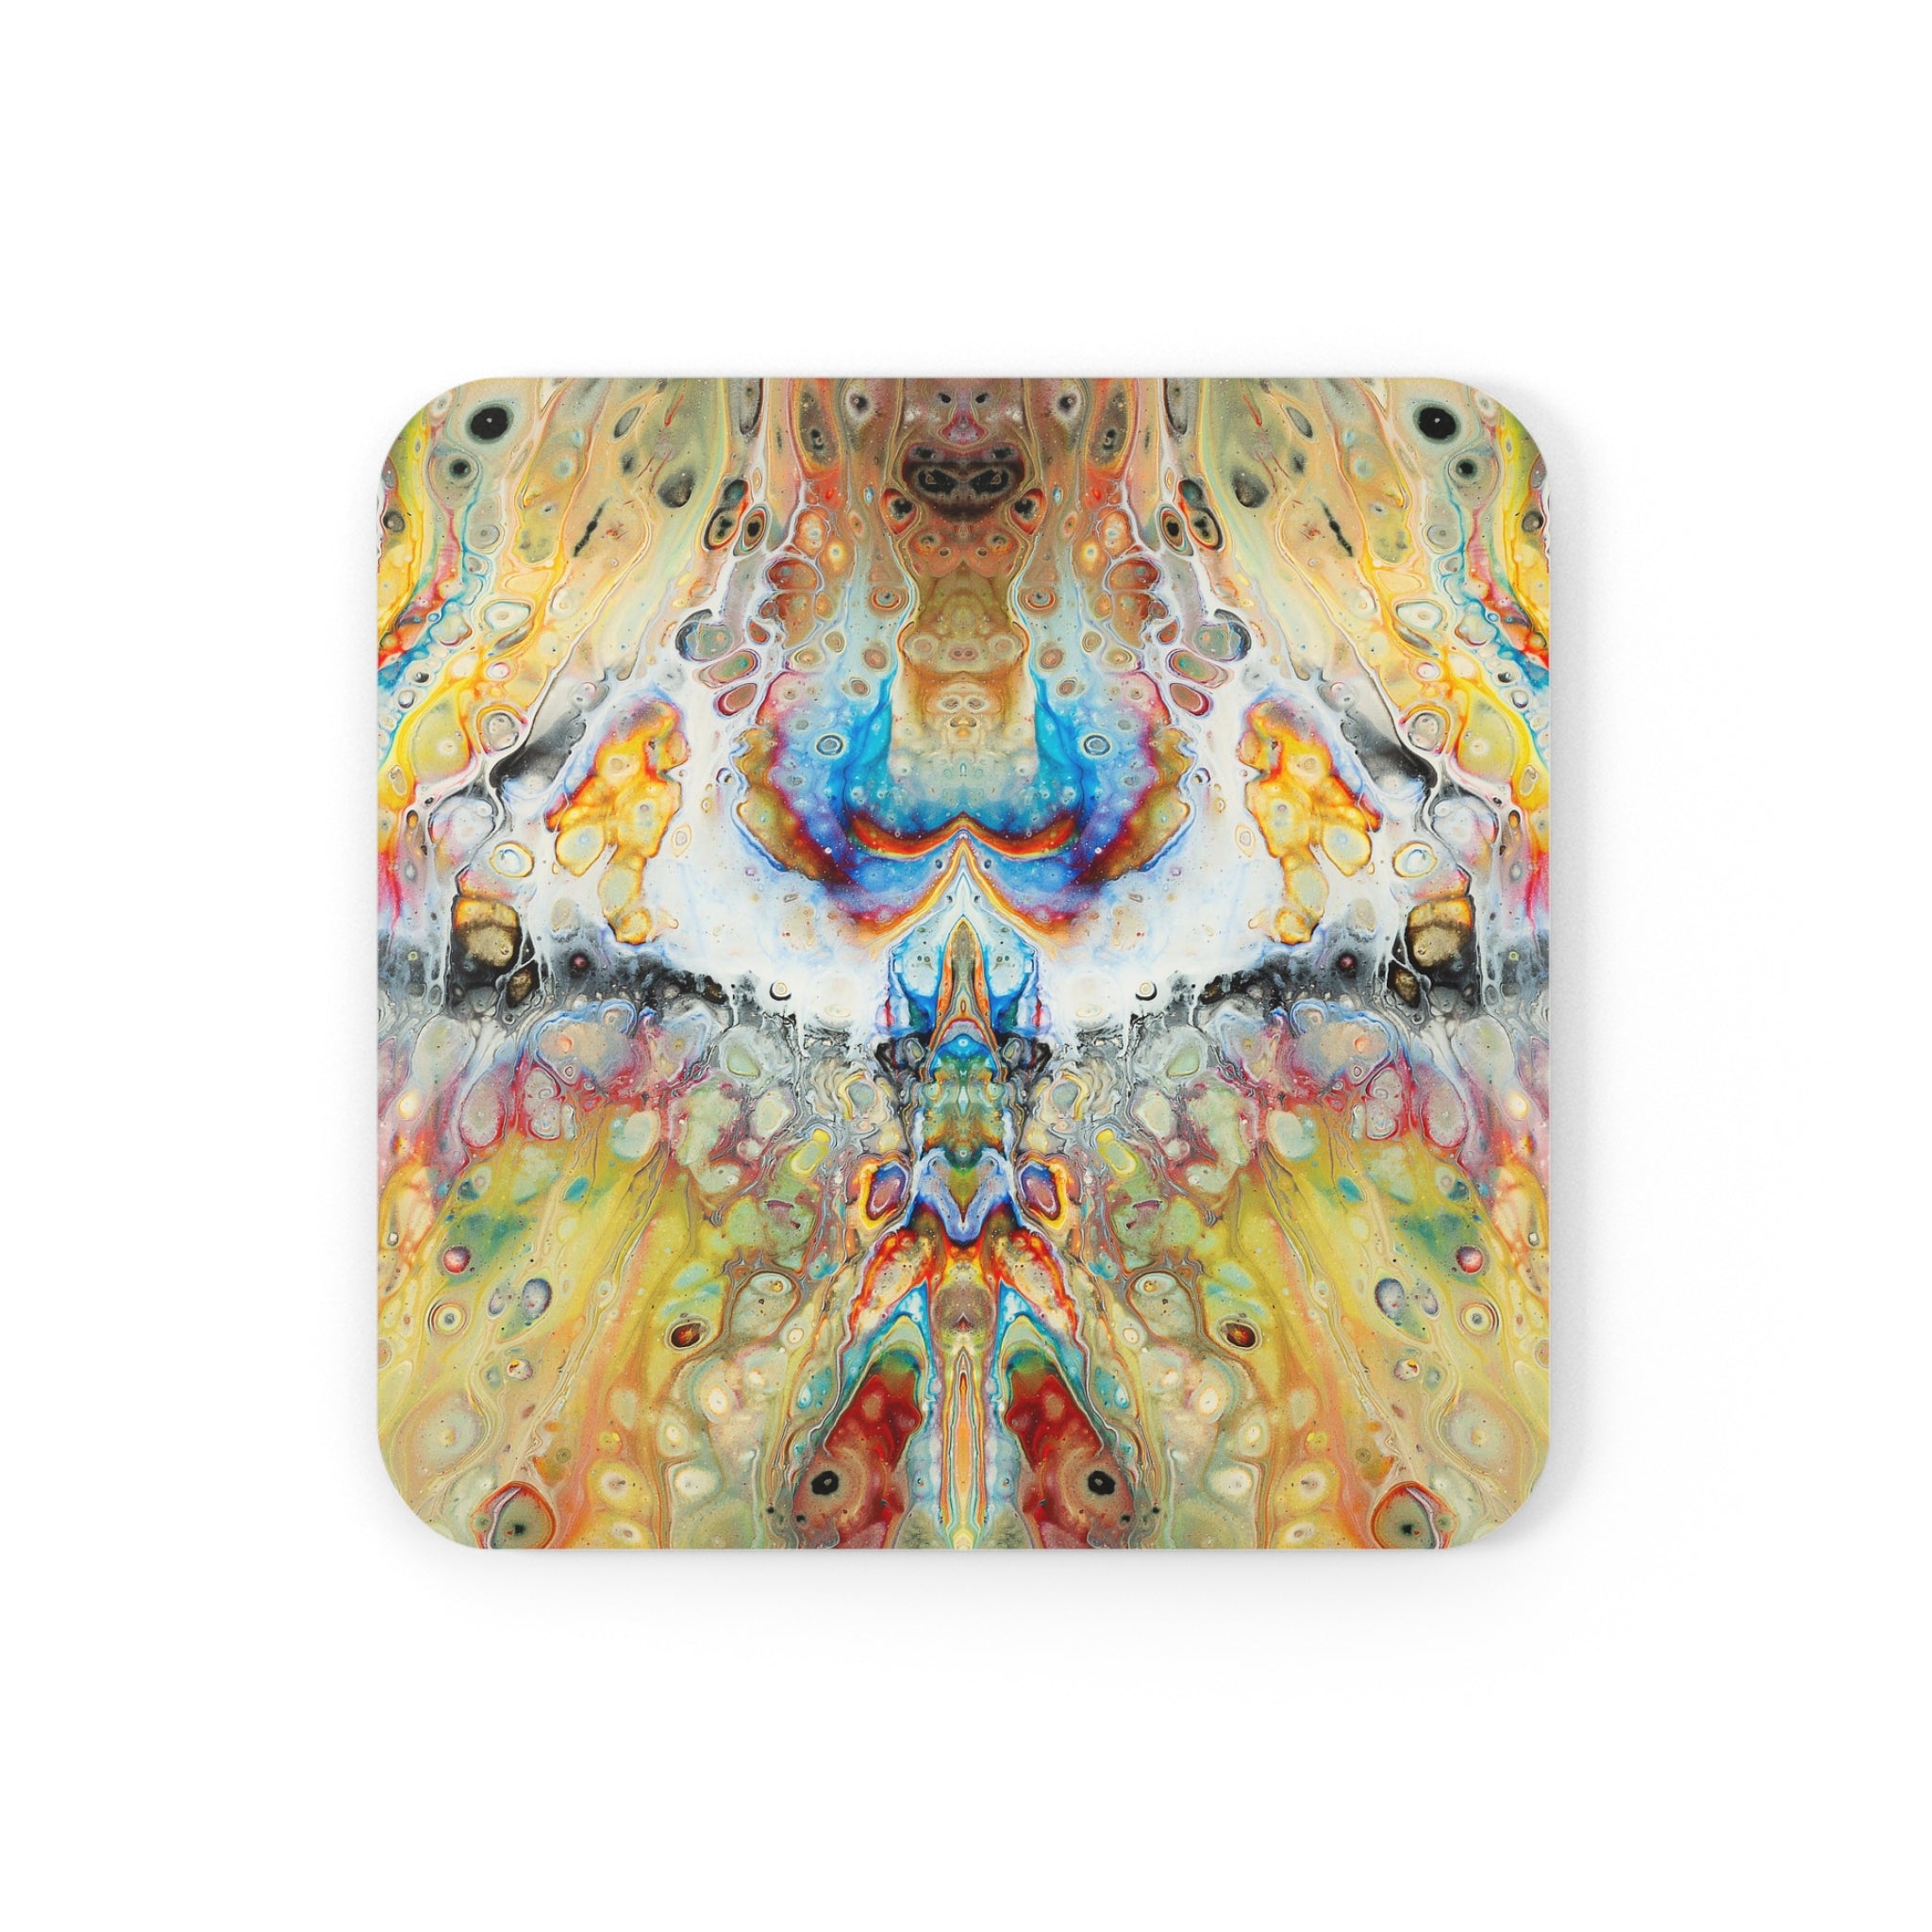 Cameron Creations - Universal Collision - Stylish Coffee Coaster - Square Front